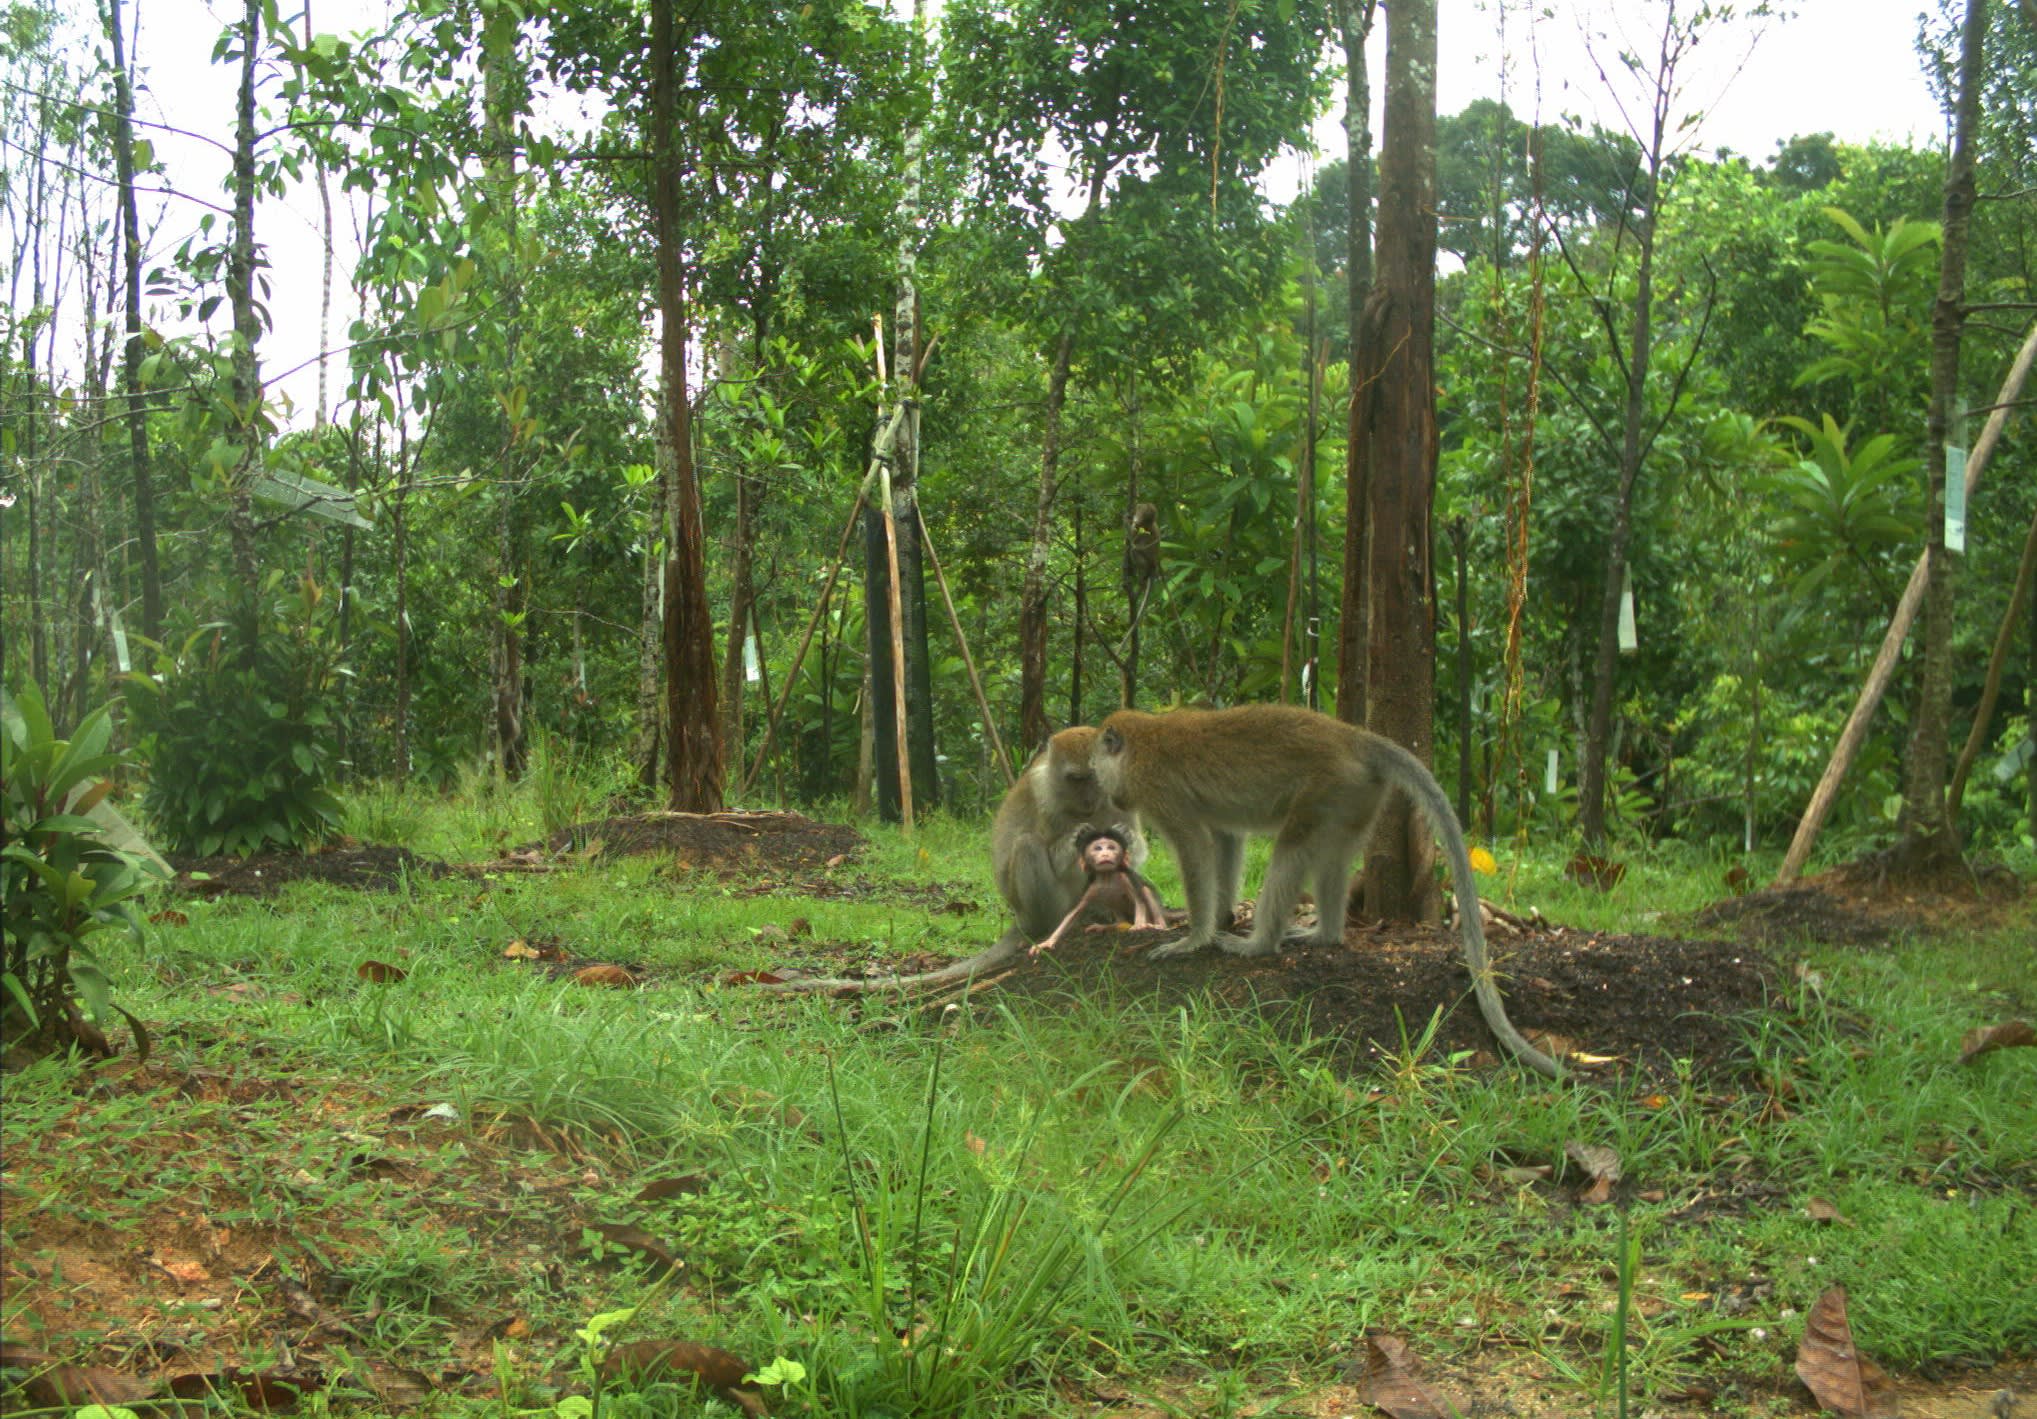 A picture of monkeys at Mandai Wildlife Bridge. It is likely that the global biodiversity framework would subject Singapore’s national biodiversity management plans to more international scrutiny by international groups. 